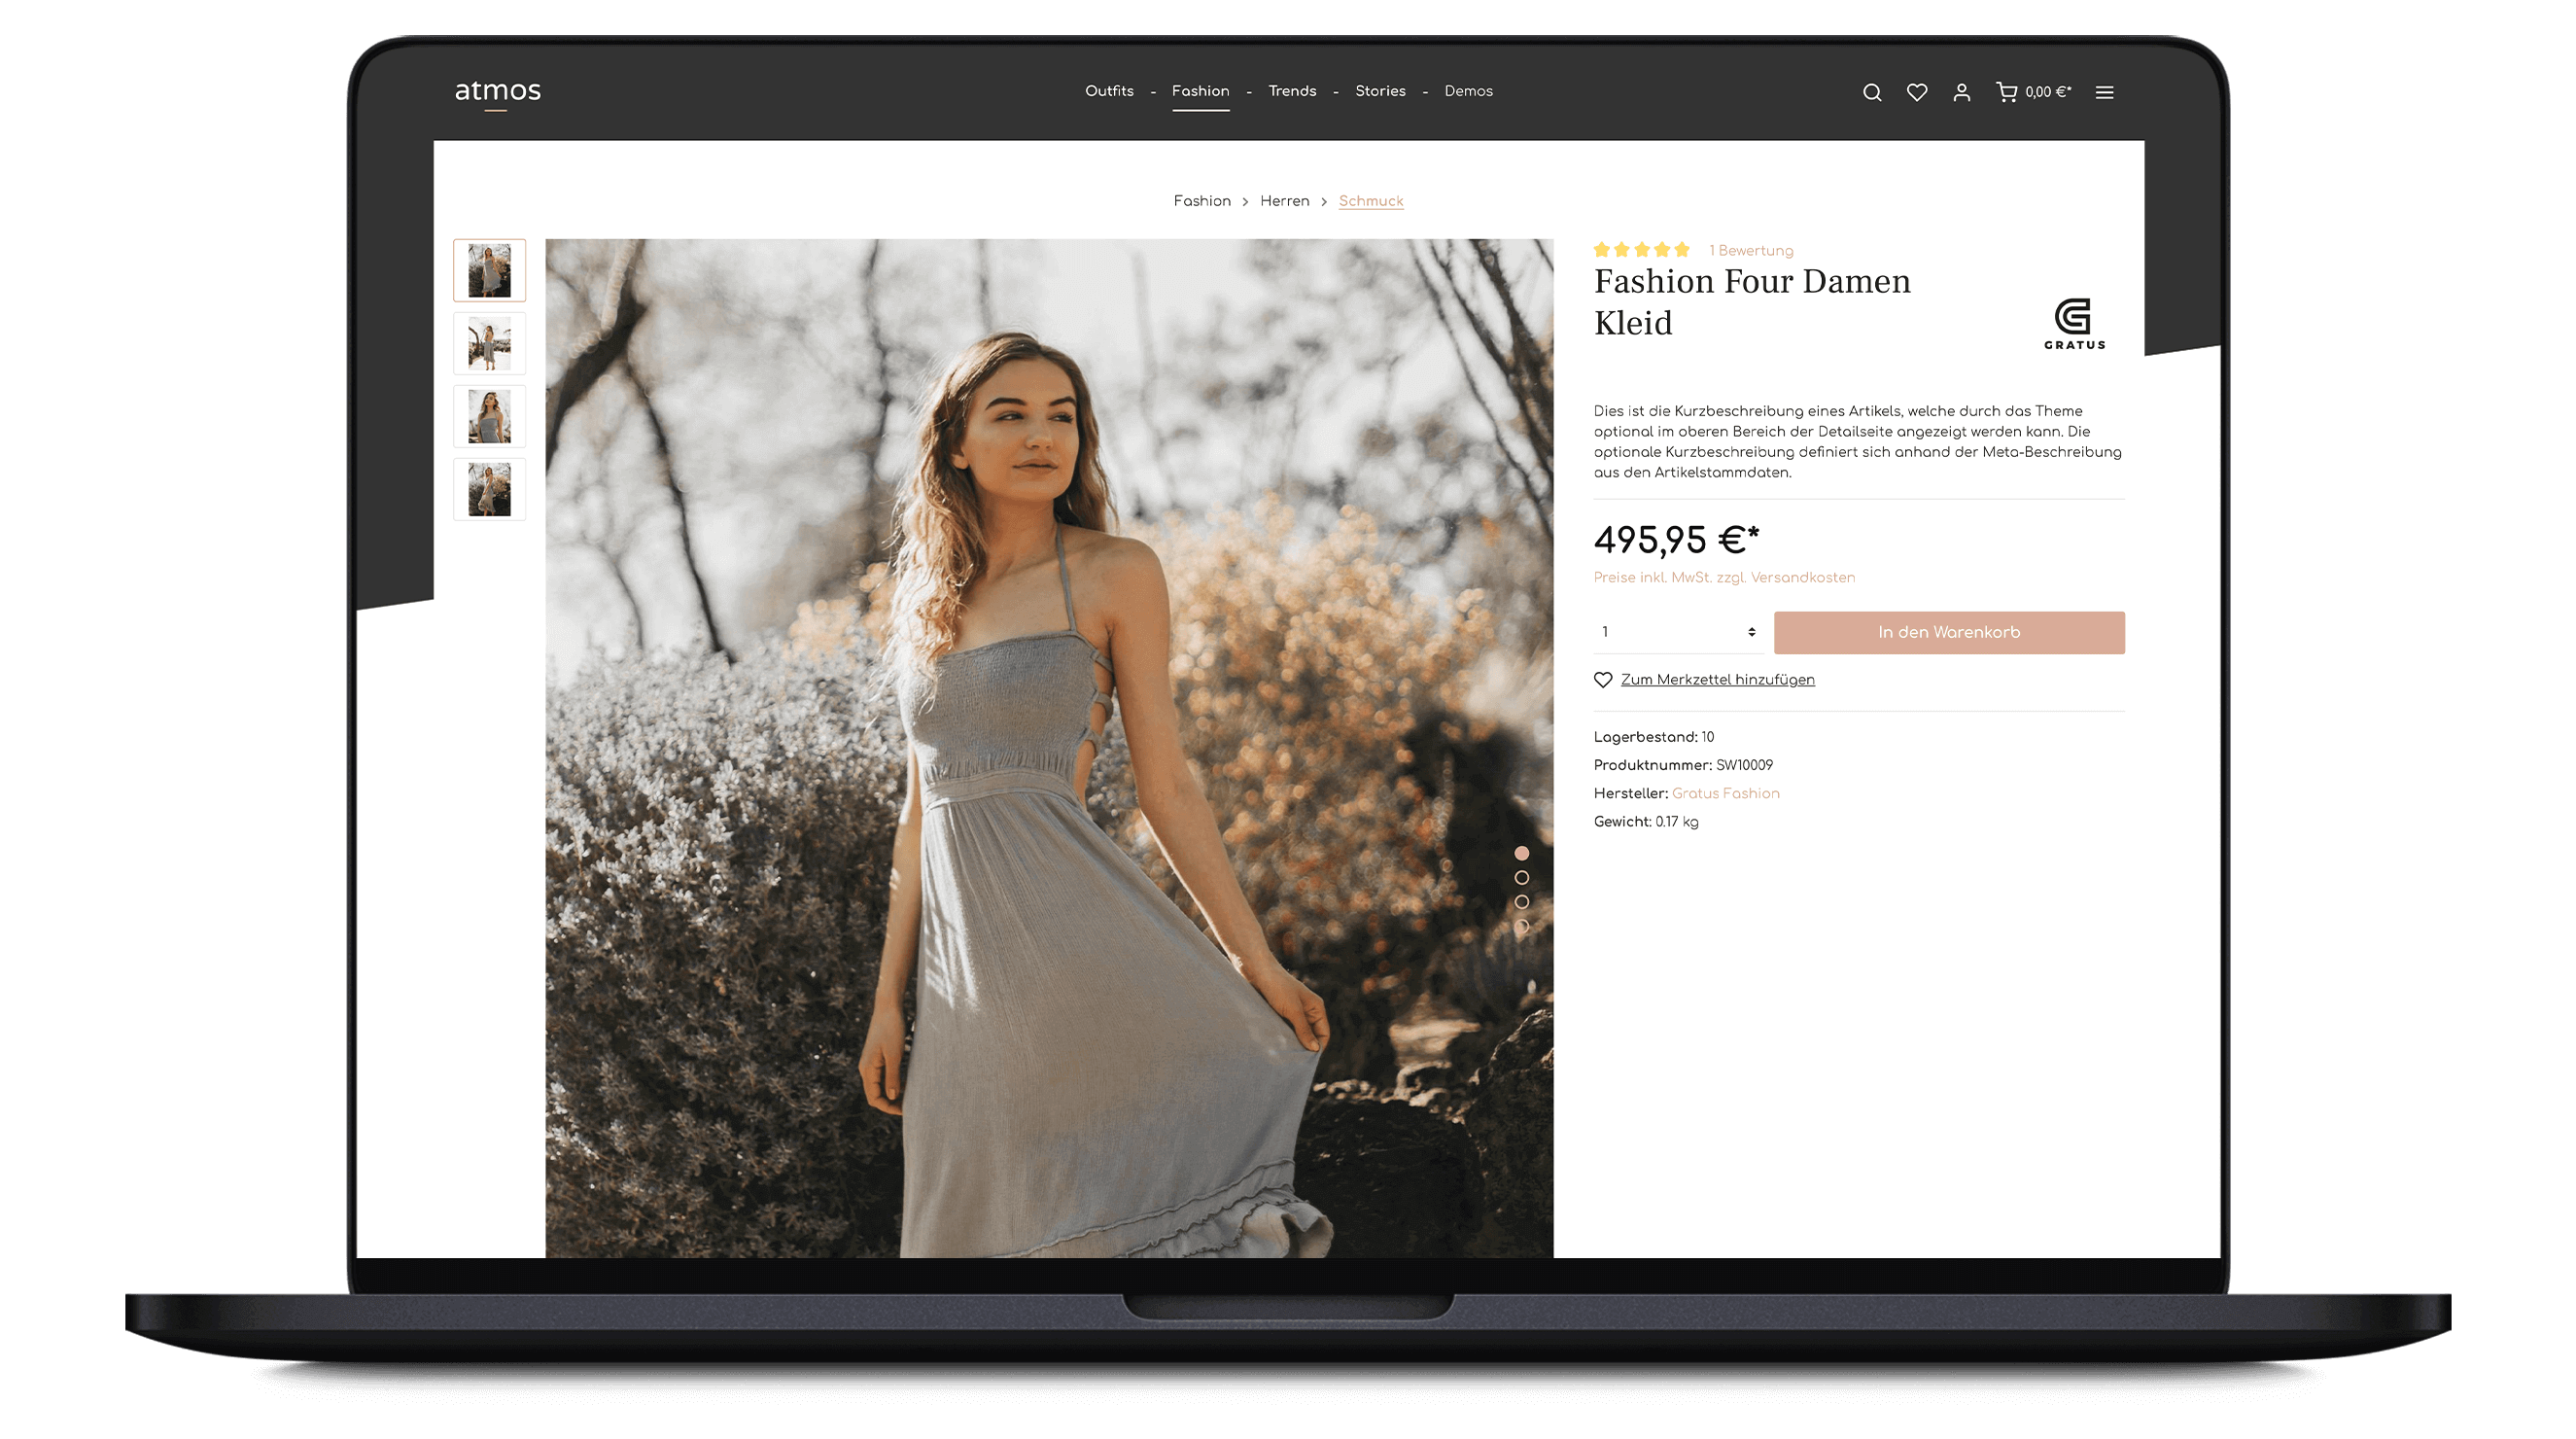 Image gallery feature